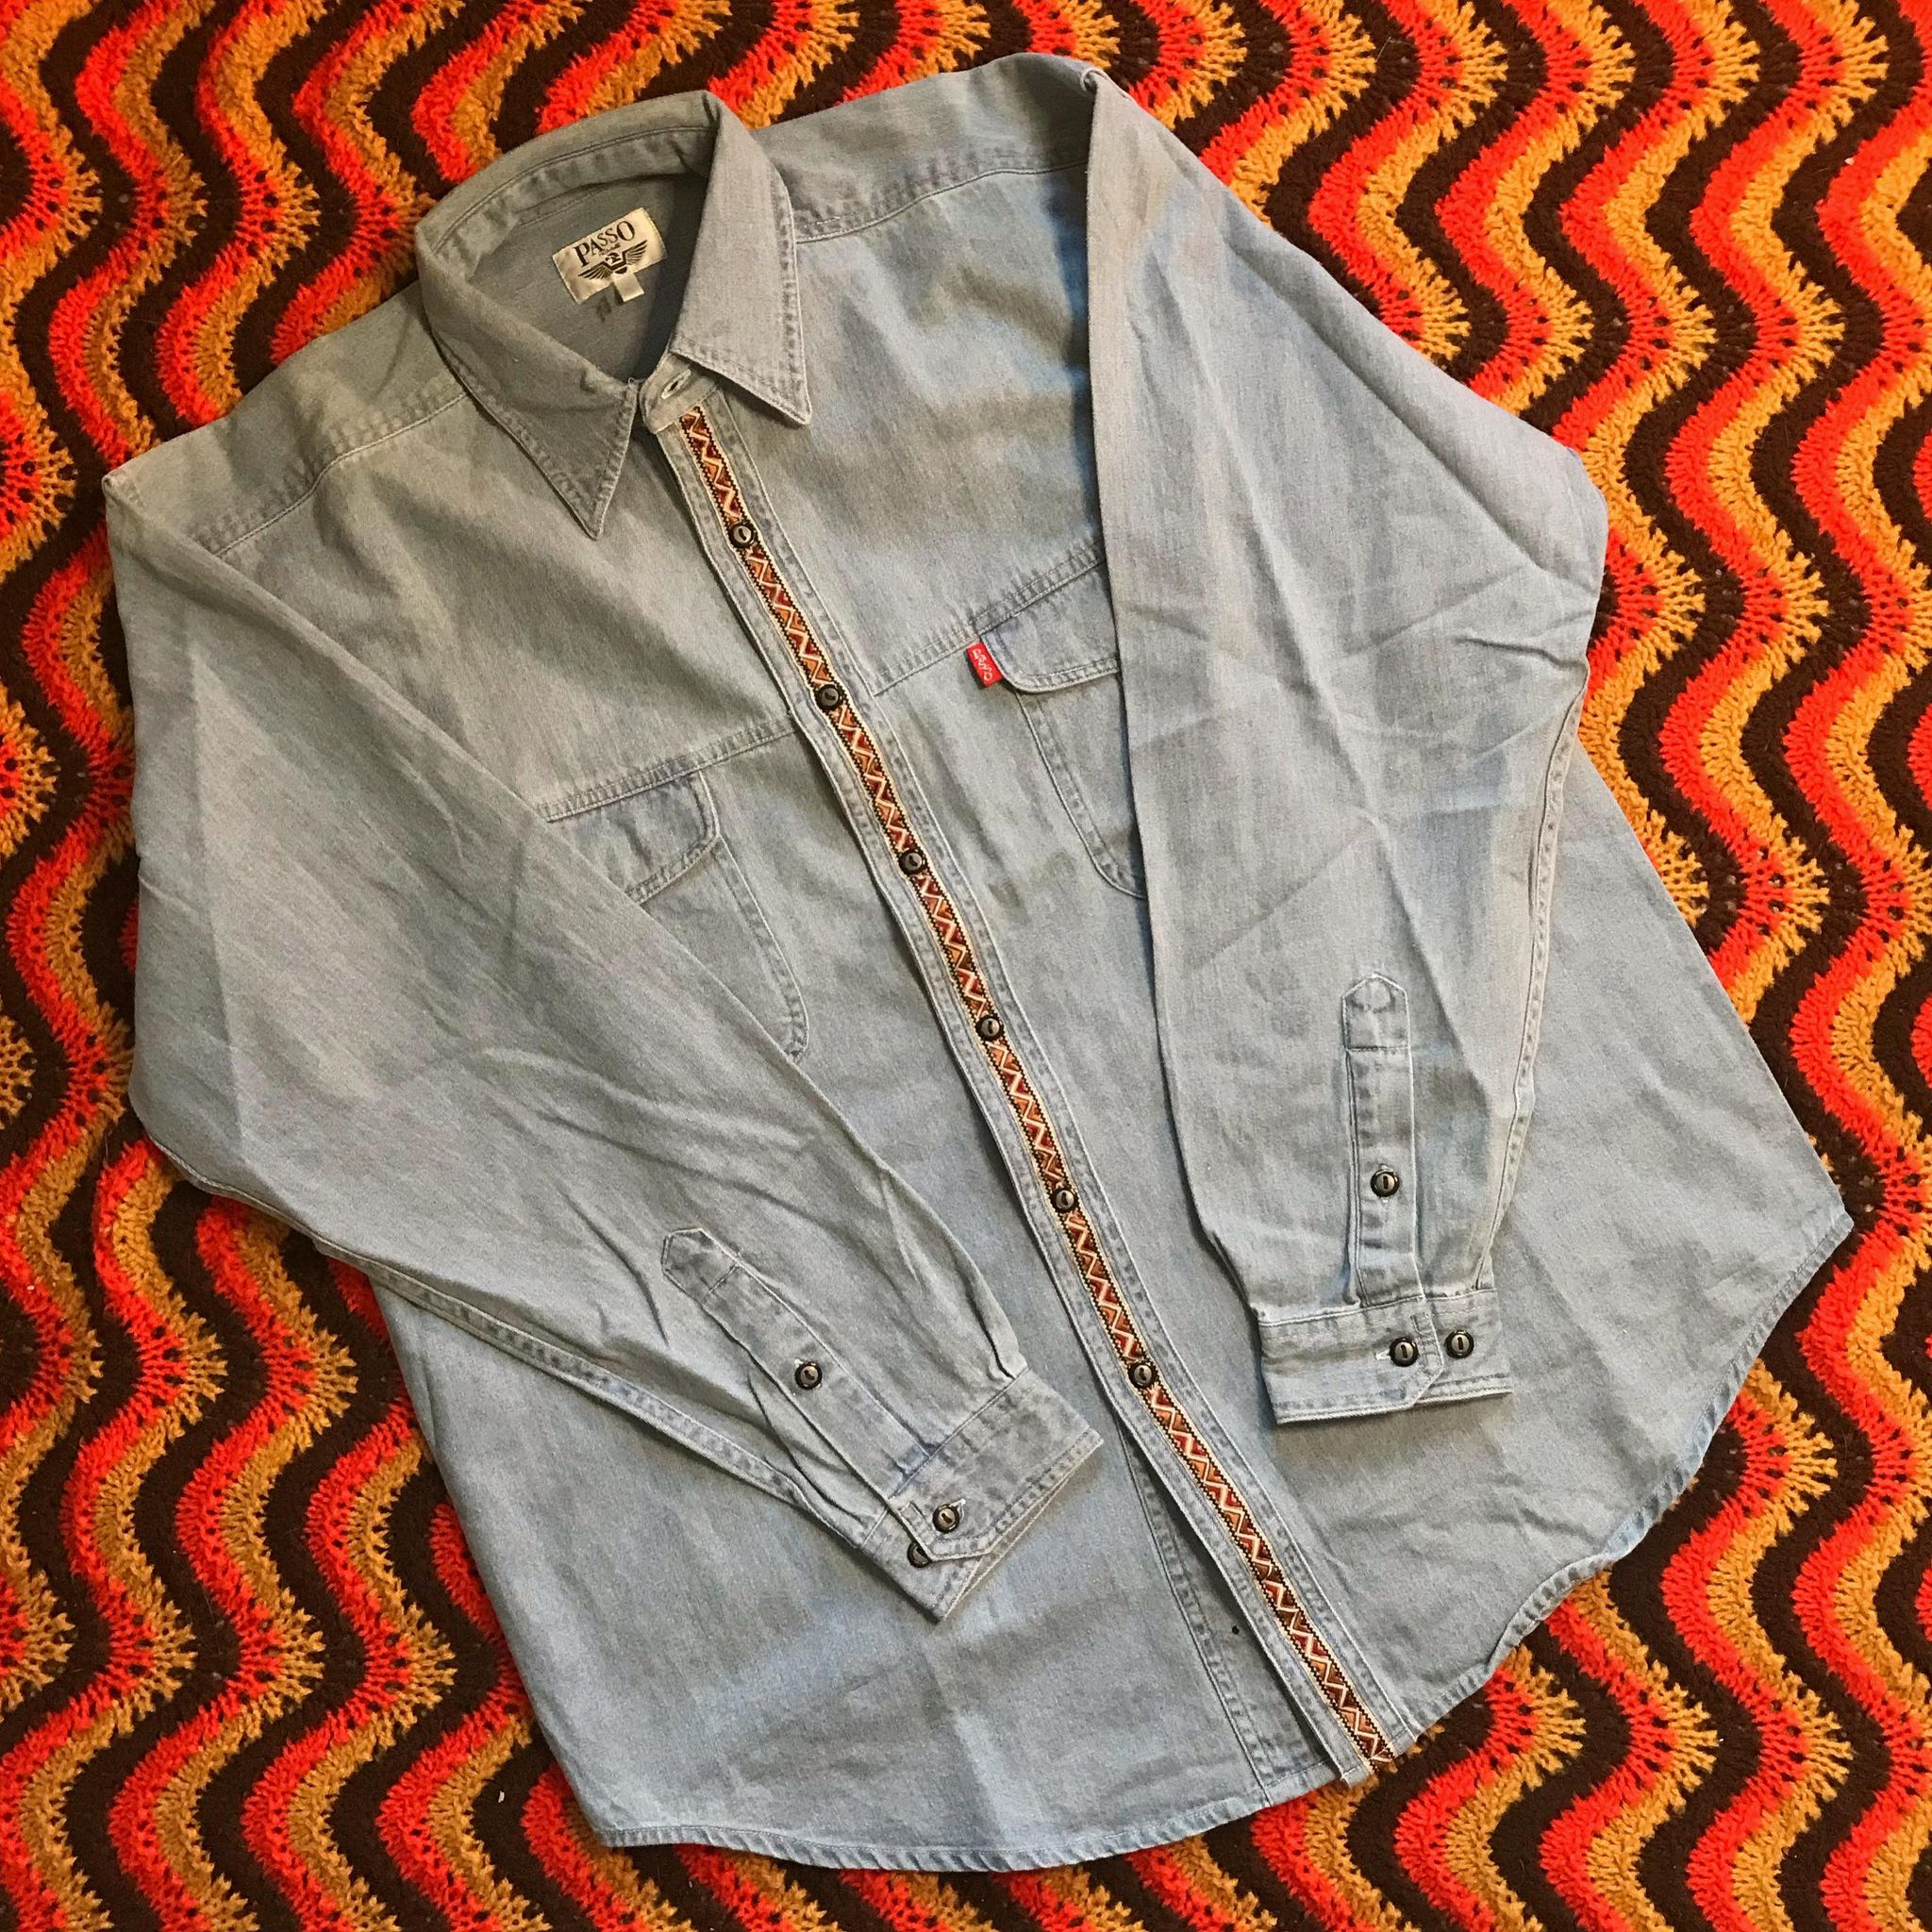 'ON THE RANGE' BUTTON-UP